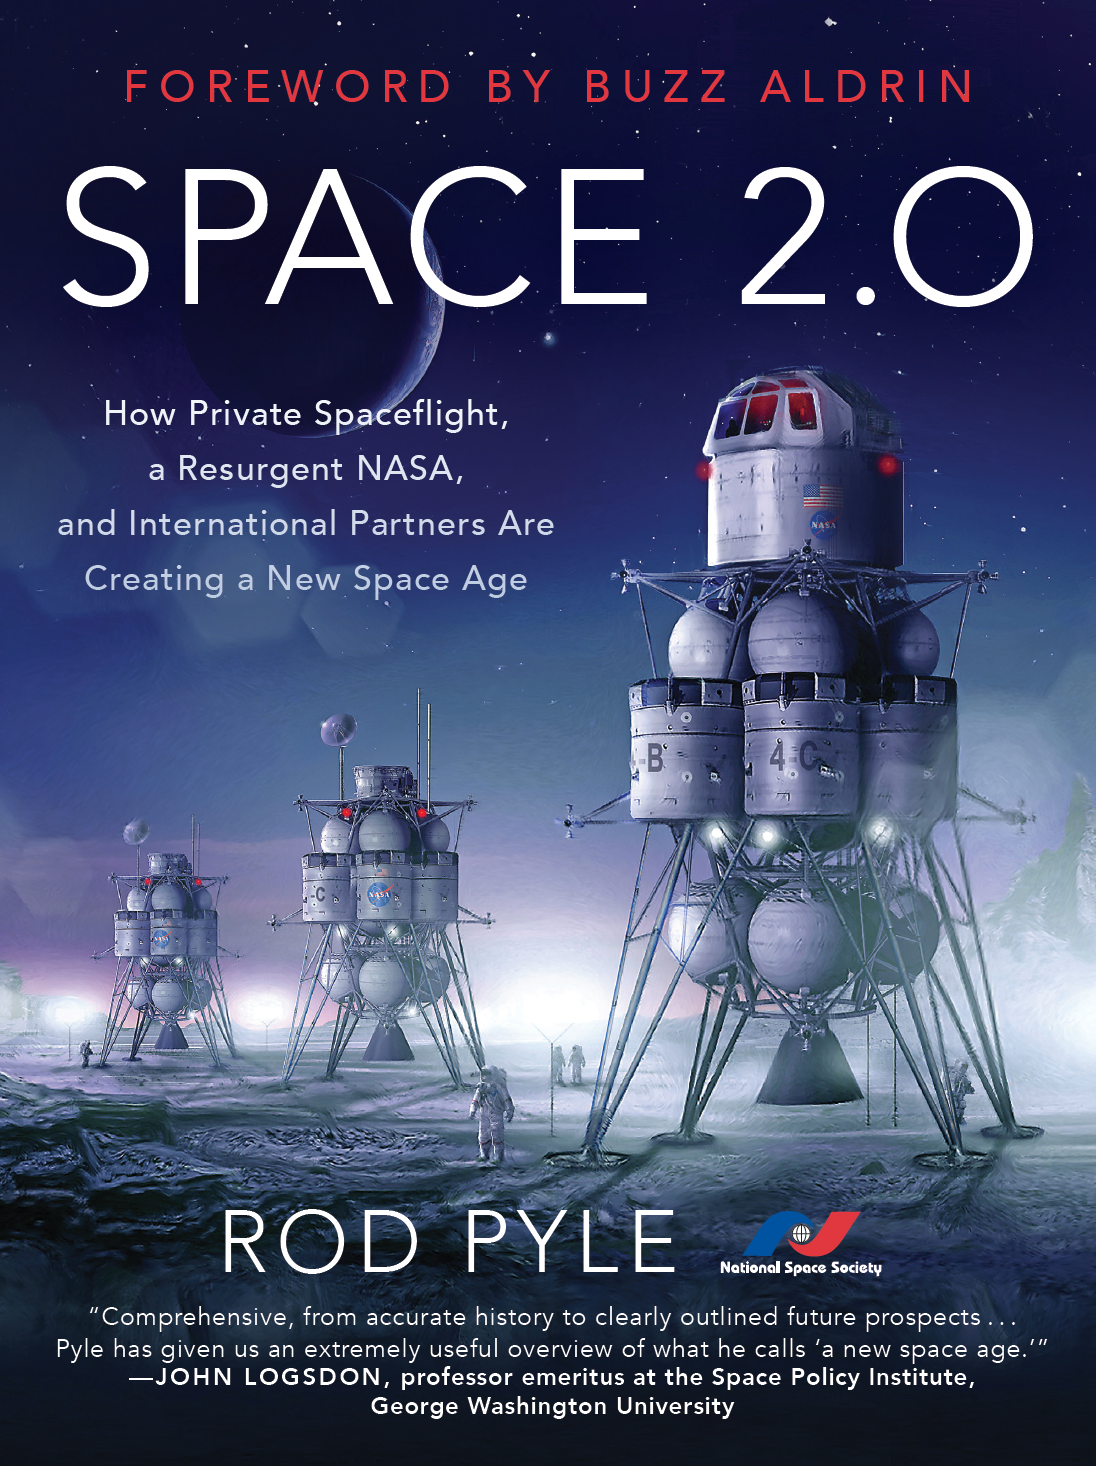 Space 2.0: Something's Going to Happen, Something Wonderful